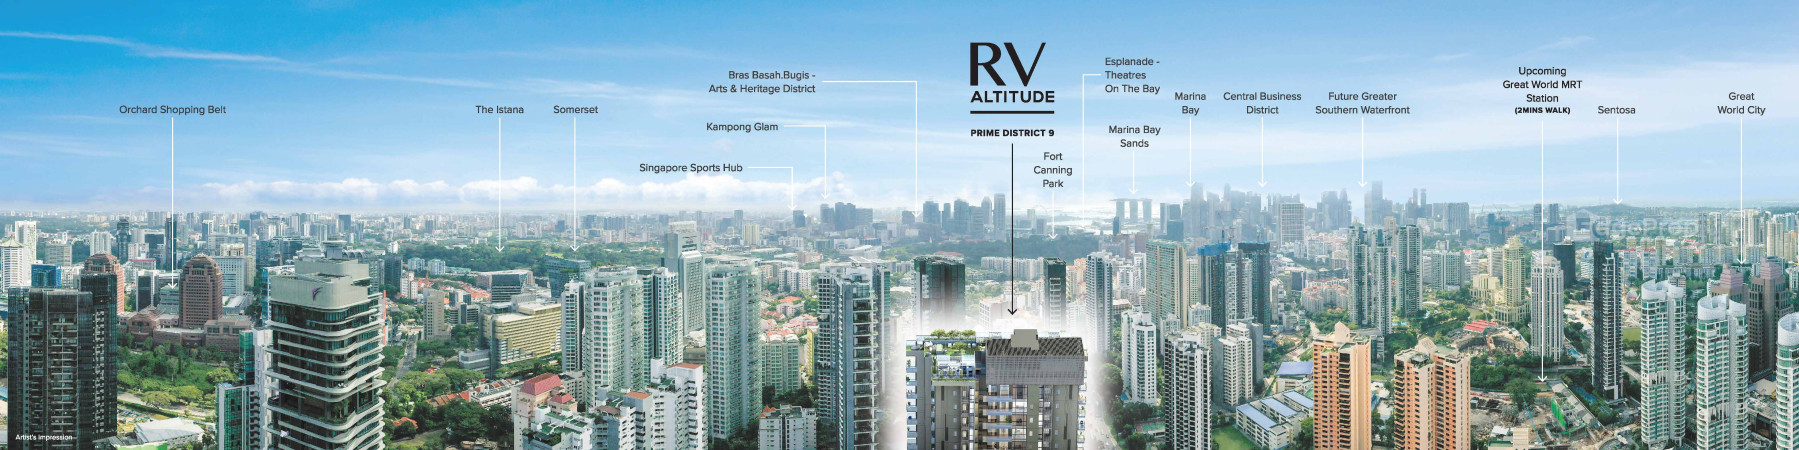 RV ALTITUDE: RIVER VALLEY’S RARE FREEHOLD HOME; TWO-MINUTE WALK TO MRT - Property News